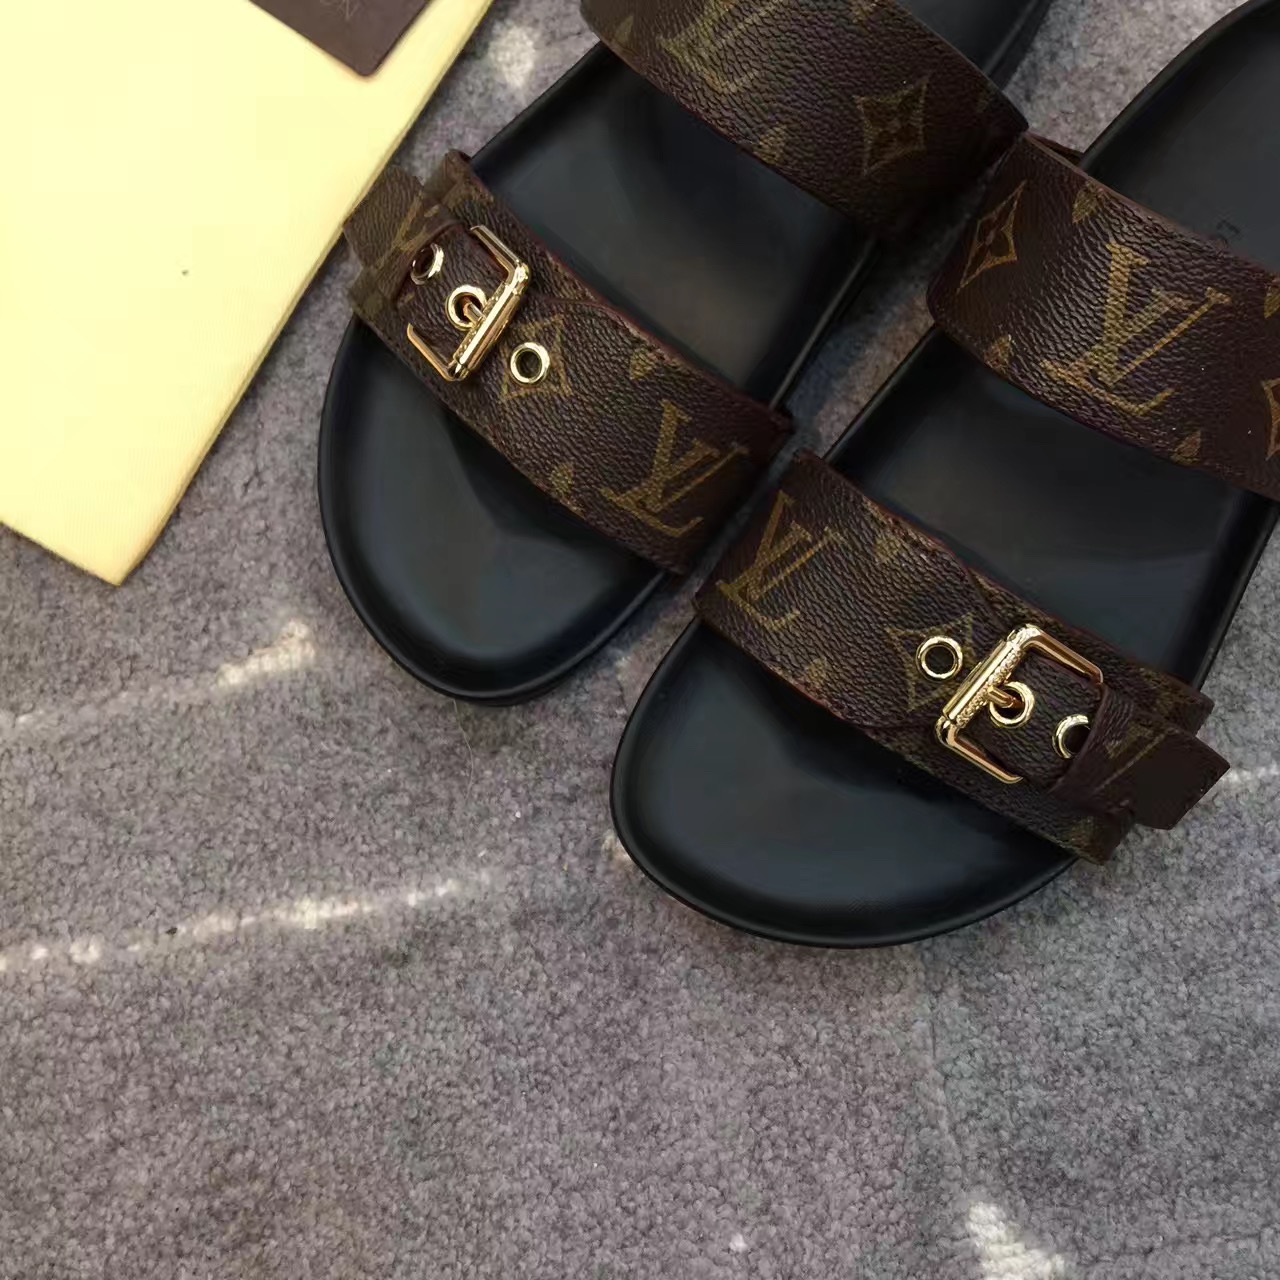 LV Bom Dia Flat Comfort Mule! These are my fav Info in bye-oh